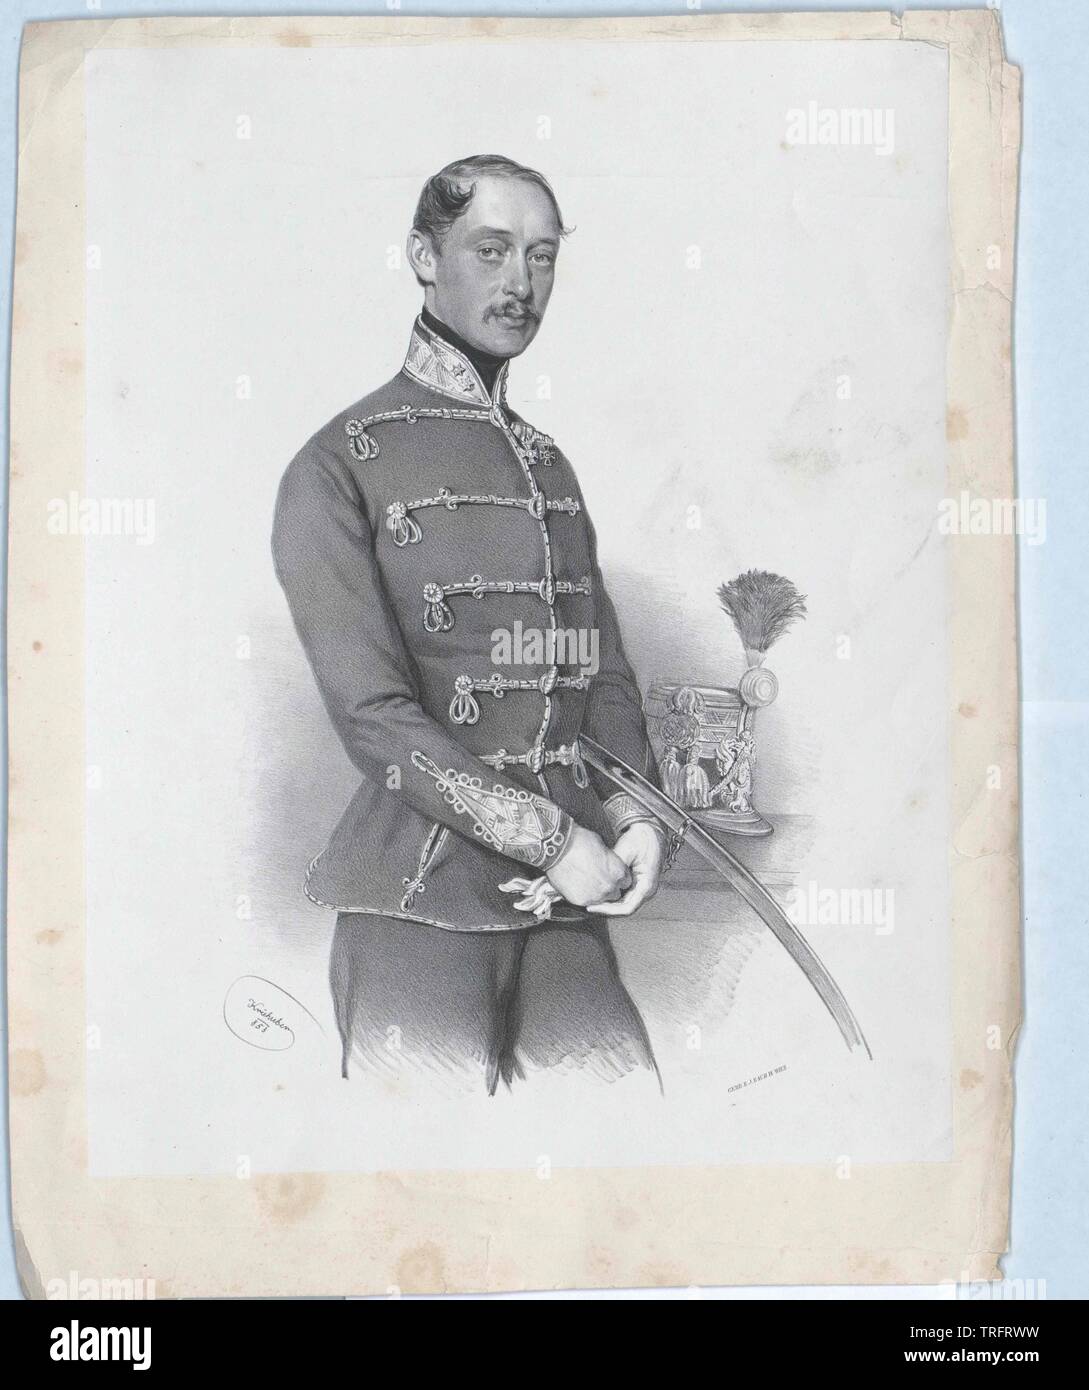 Pallavicini, Oswald Markgraf, Additional-Rights - Clearance-Info - Not-Available Stockfoto